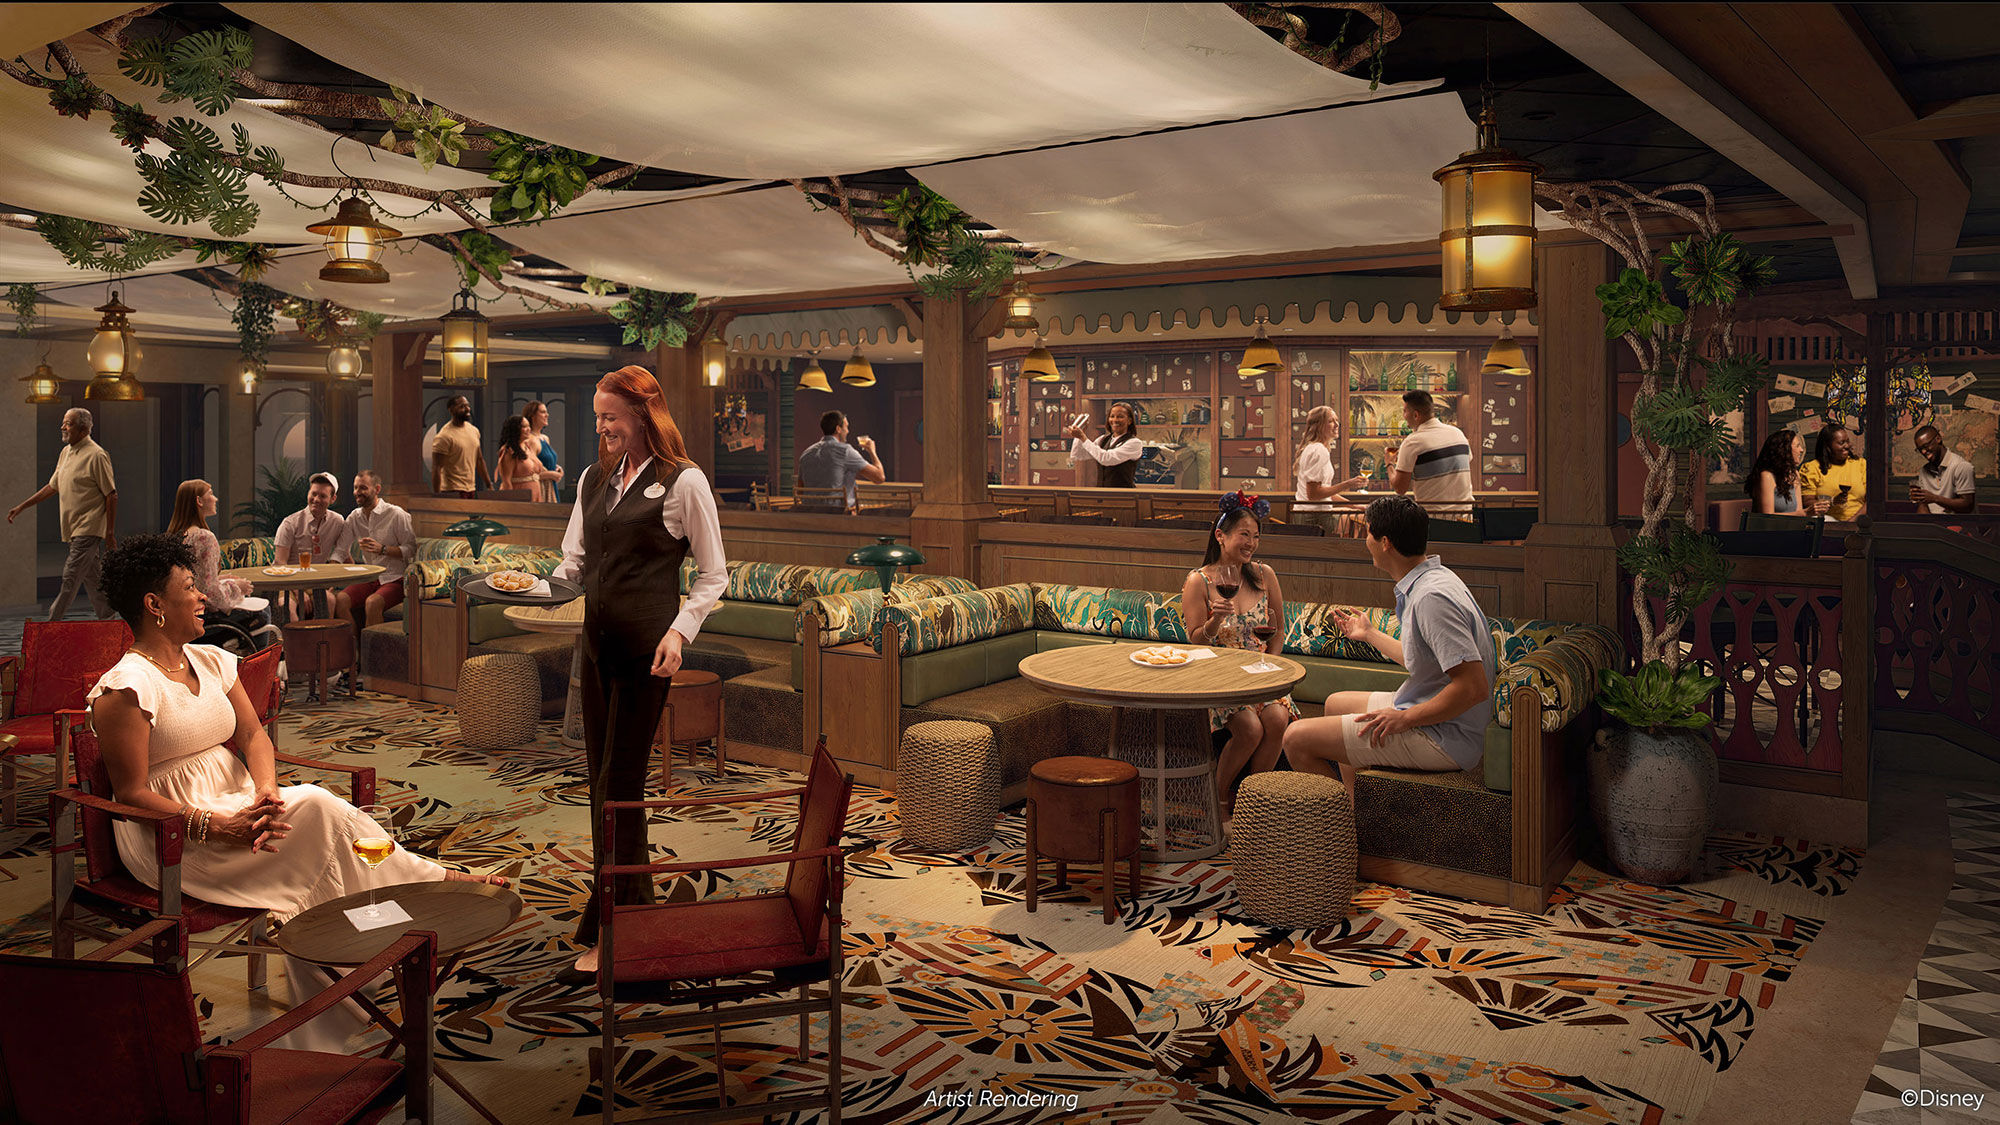 The Treasure will also include venues from Disney's theme park attractions.  One is the Skipper Society, a bar with nods to the Jungle Cruise attraction.